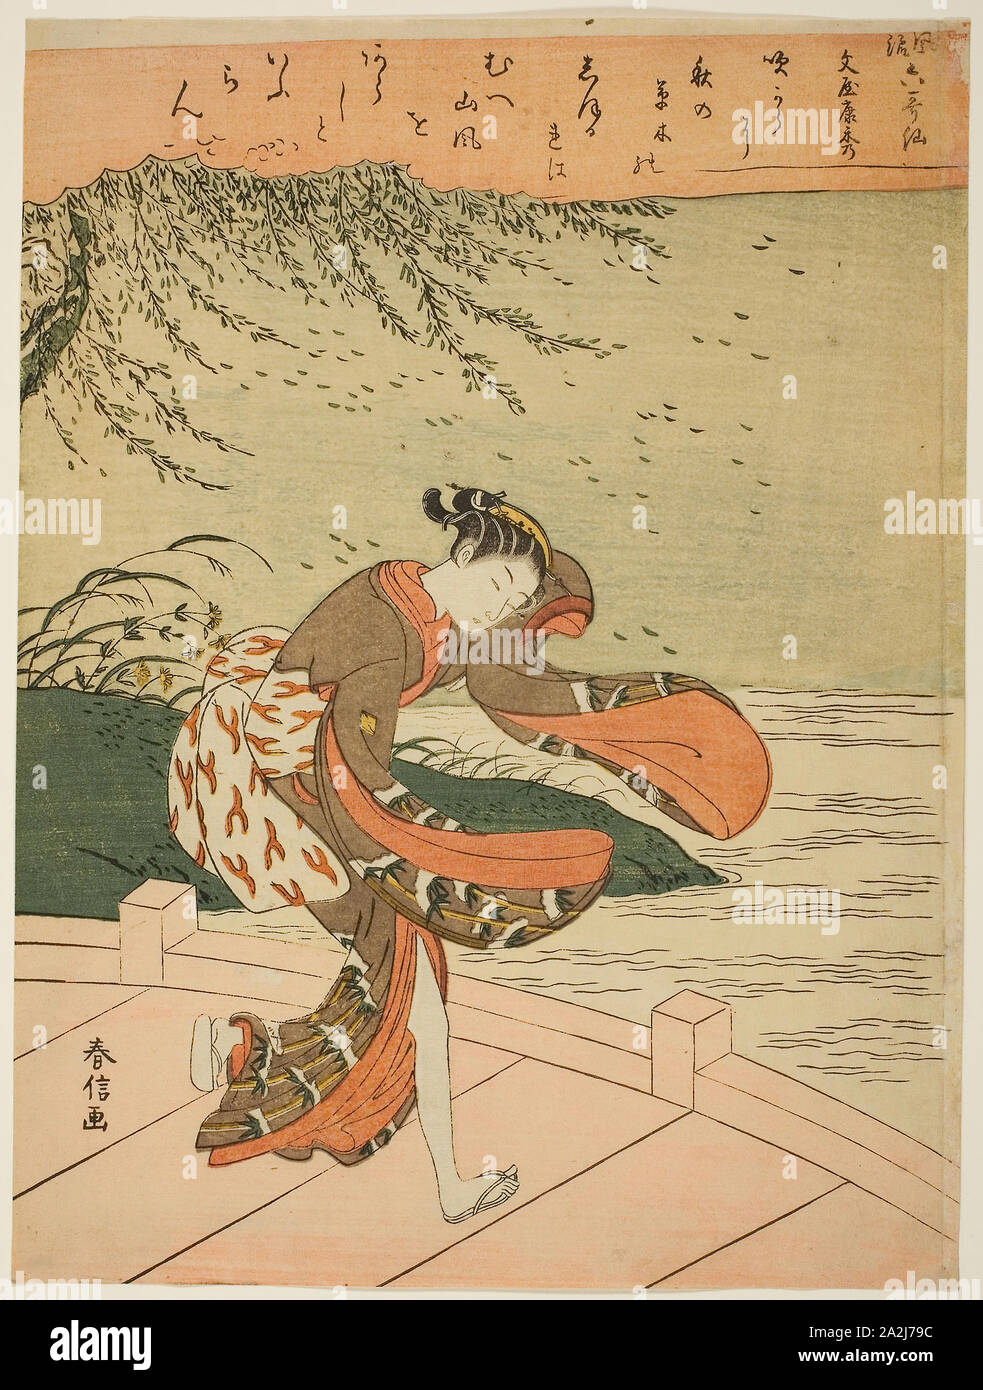 Fun’ya no Yasuhide, from the series Allegory of the Six Poets (Furyu rokkasen), c. 1768, Suzuki Harunobu 鈴木 春信, Japanese, 1725 (?)-1770, Japan, Color woodblock print, chuban, 27.9 x 20.7 cm (11 x 8 1/4 in.), Middle East Costumes, Egypt, May 14, 1878, Lockwood de Forest, American, 1850-1932, United States, Oil on card, 254 x 229 mm, Orange Sky with Scattered Clouds, Greece, February 22, 1878, Lockwood de Forest, American, 1850-1932, United States, Oil on card, 224 x 318 mm, Full Moon Over Luxor Ruins, Off the Nile, February 9, 1876, Lockwood de Forest, American, 1850-1932, United States, Oil on Stock Photo